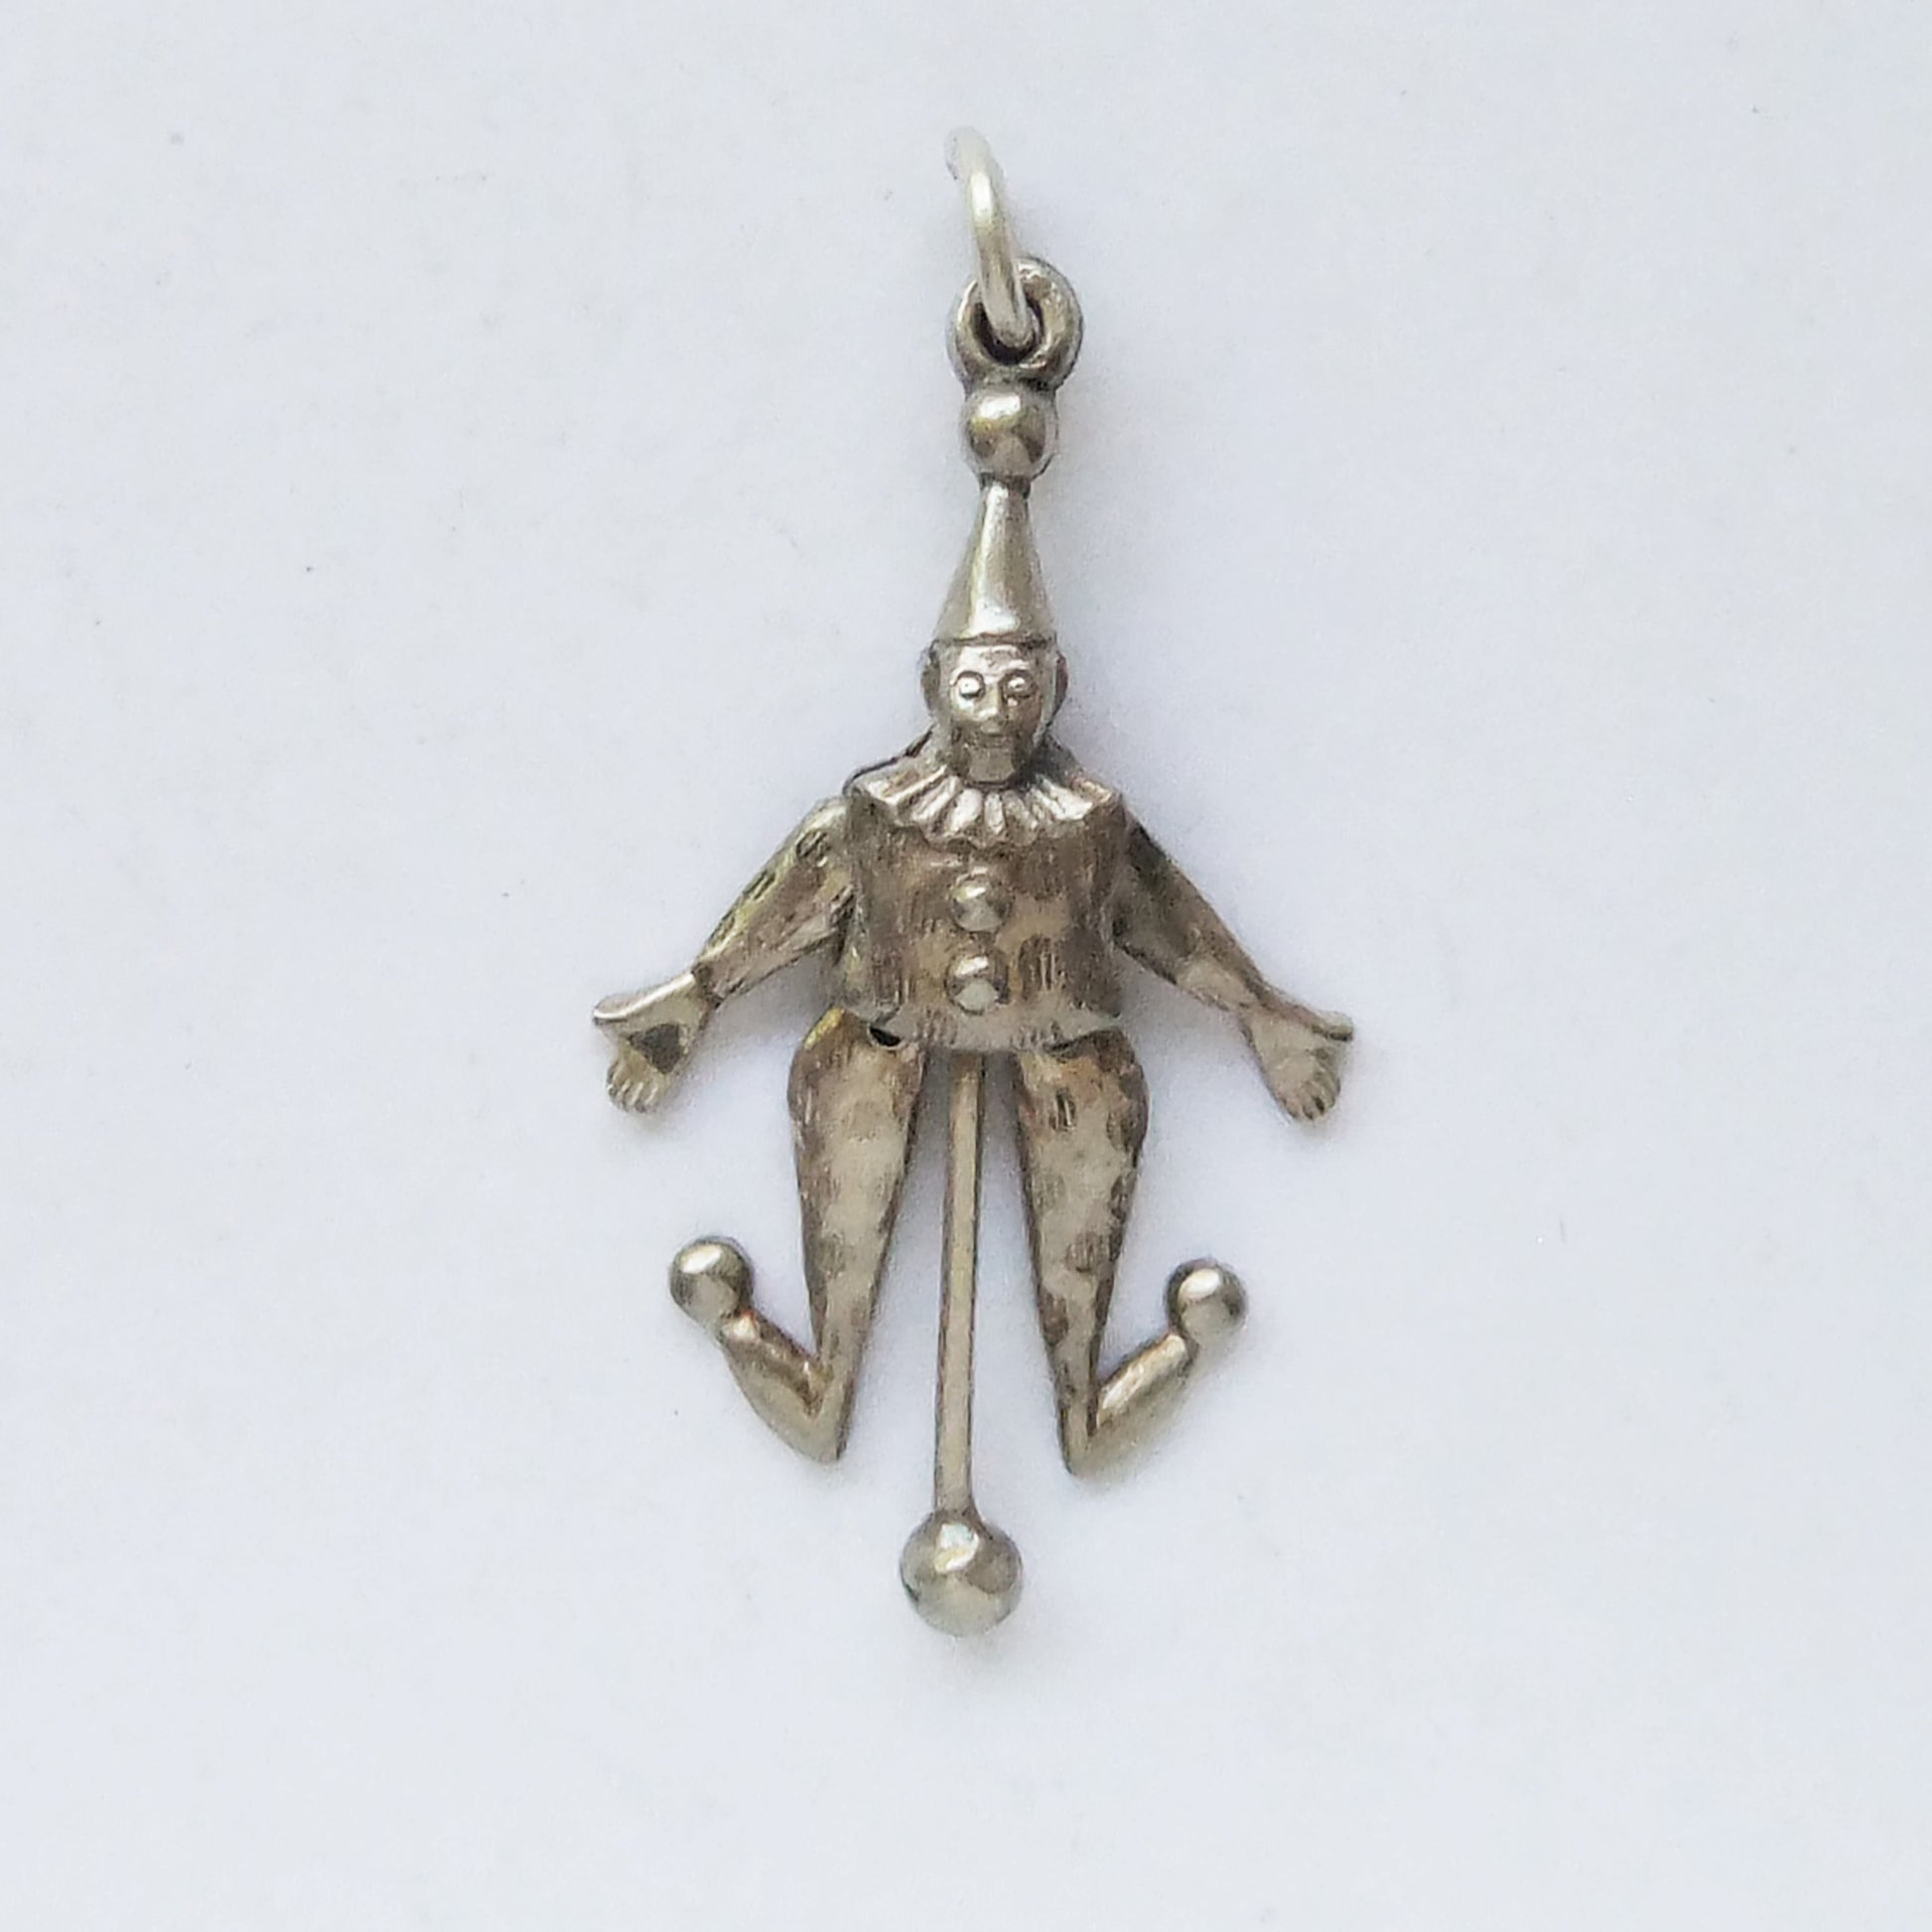 Antique articulated moving clown charm silver